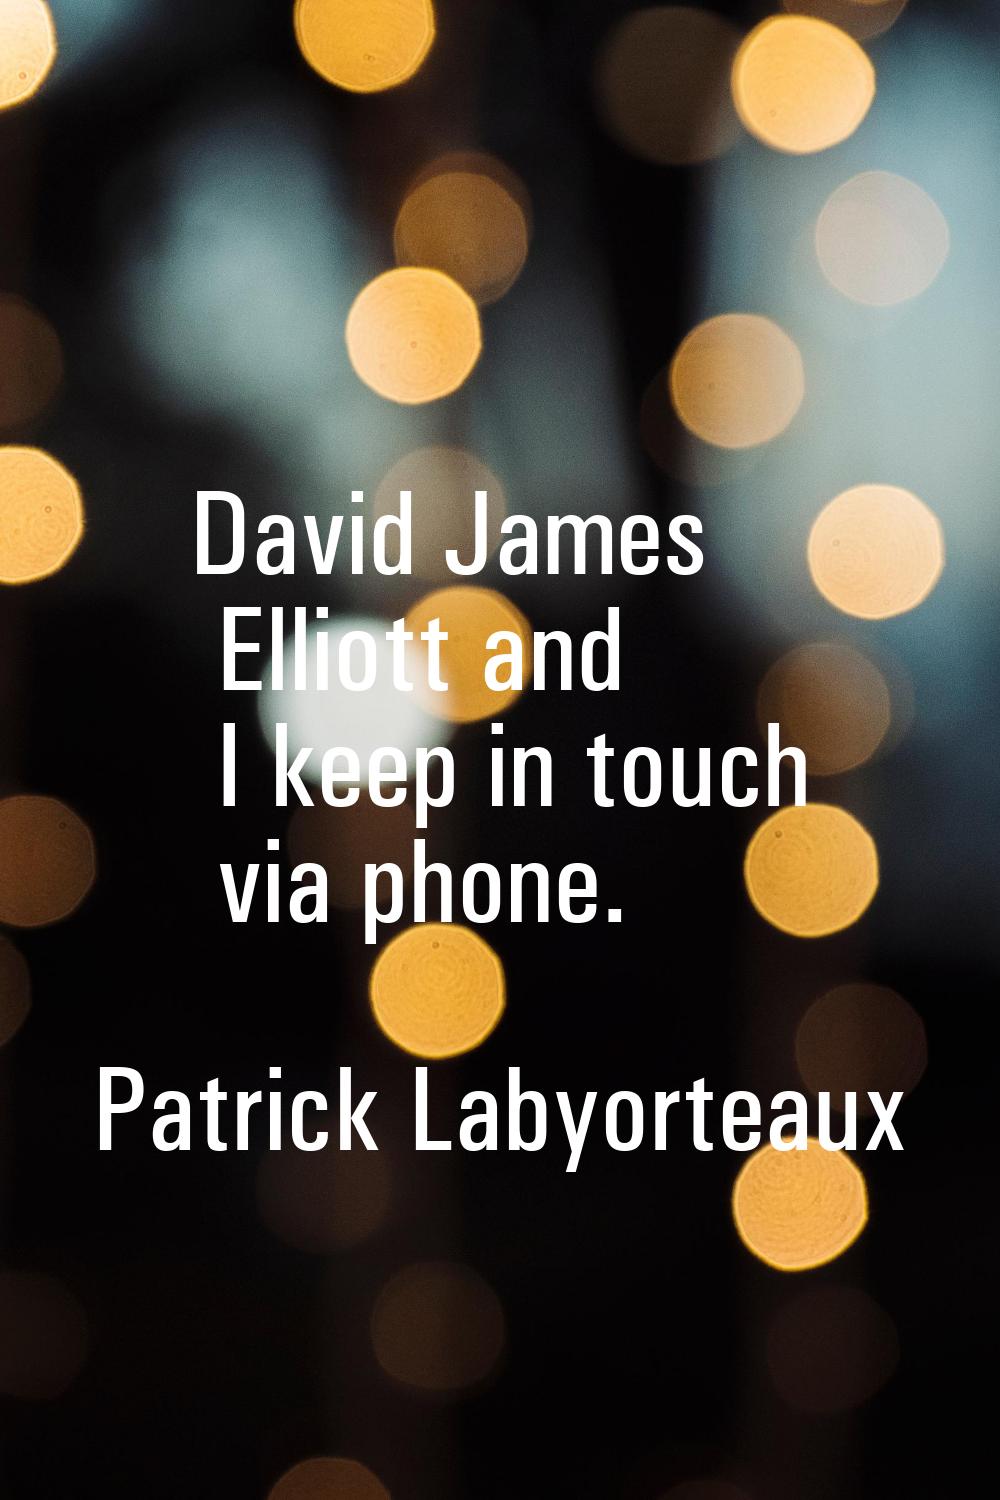 David James Elliott and I keep in touch via phone.